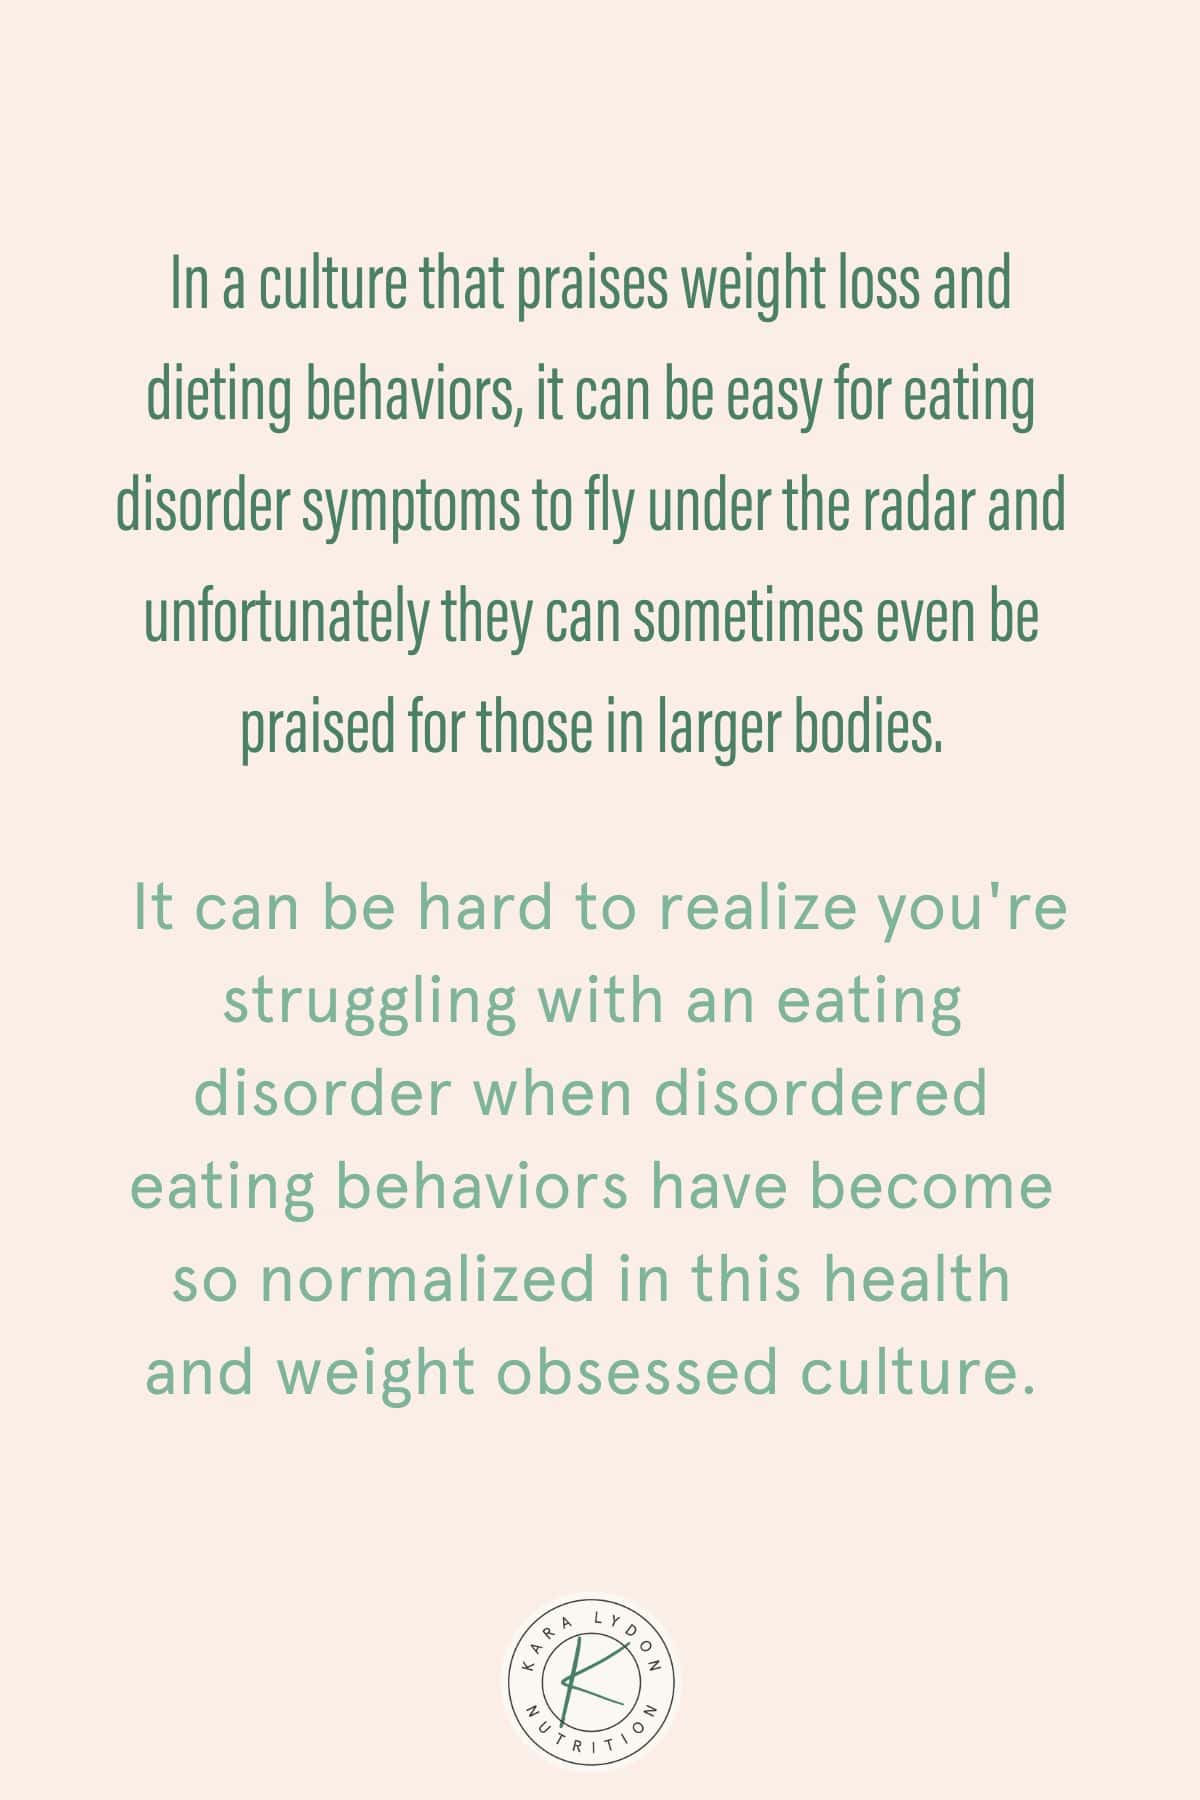 Graphic with quote: "In a culture that praises weight loss and dieting behaviors, it can be easy for eating disorder symptoms to fly under the radar and unfortunately they can sometimes even be praised for those in larger bodies. It can be hard to realize you're struggling with an eating disorder when disordered eating behaviors have become so normalized in this health and weight obsessed culture."